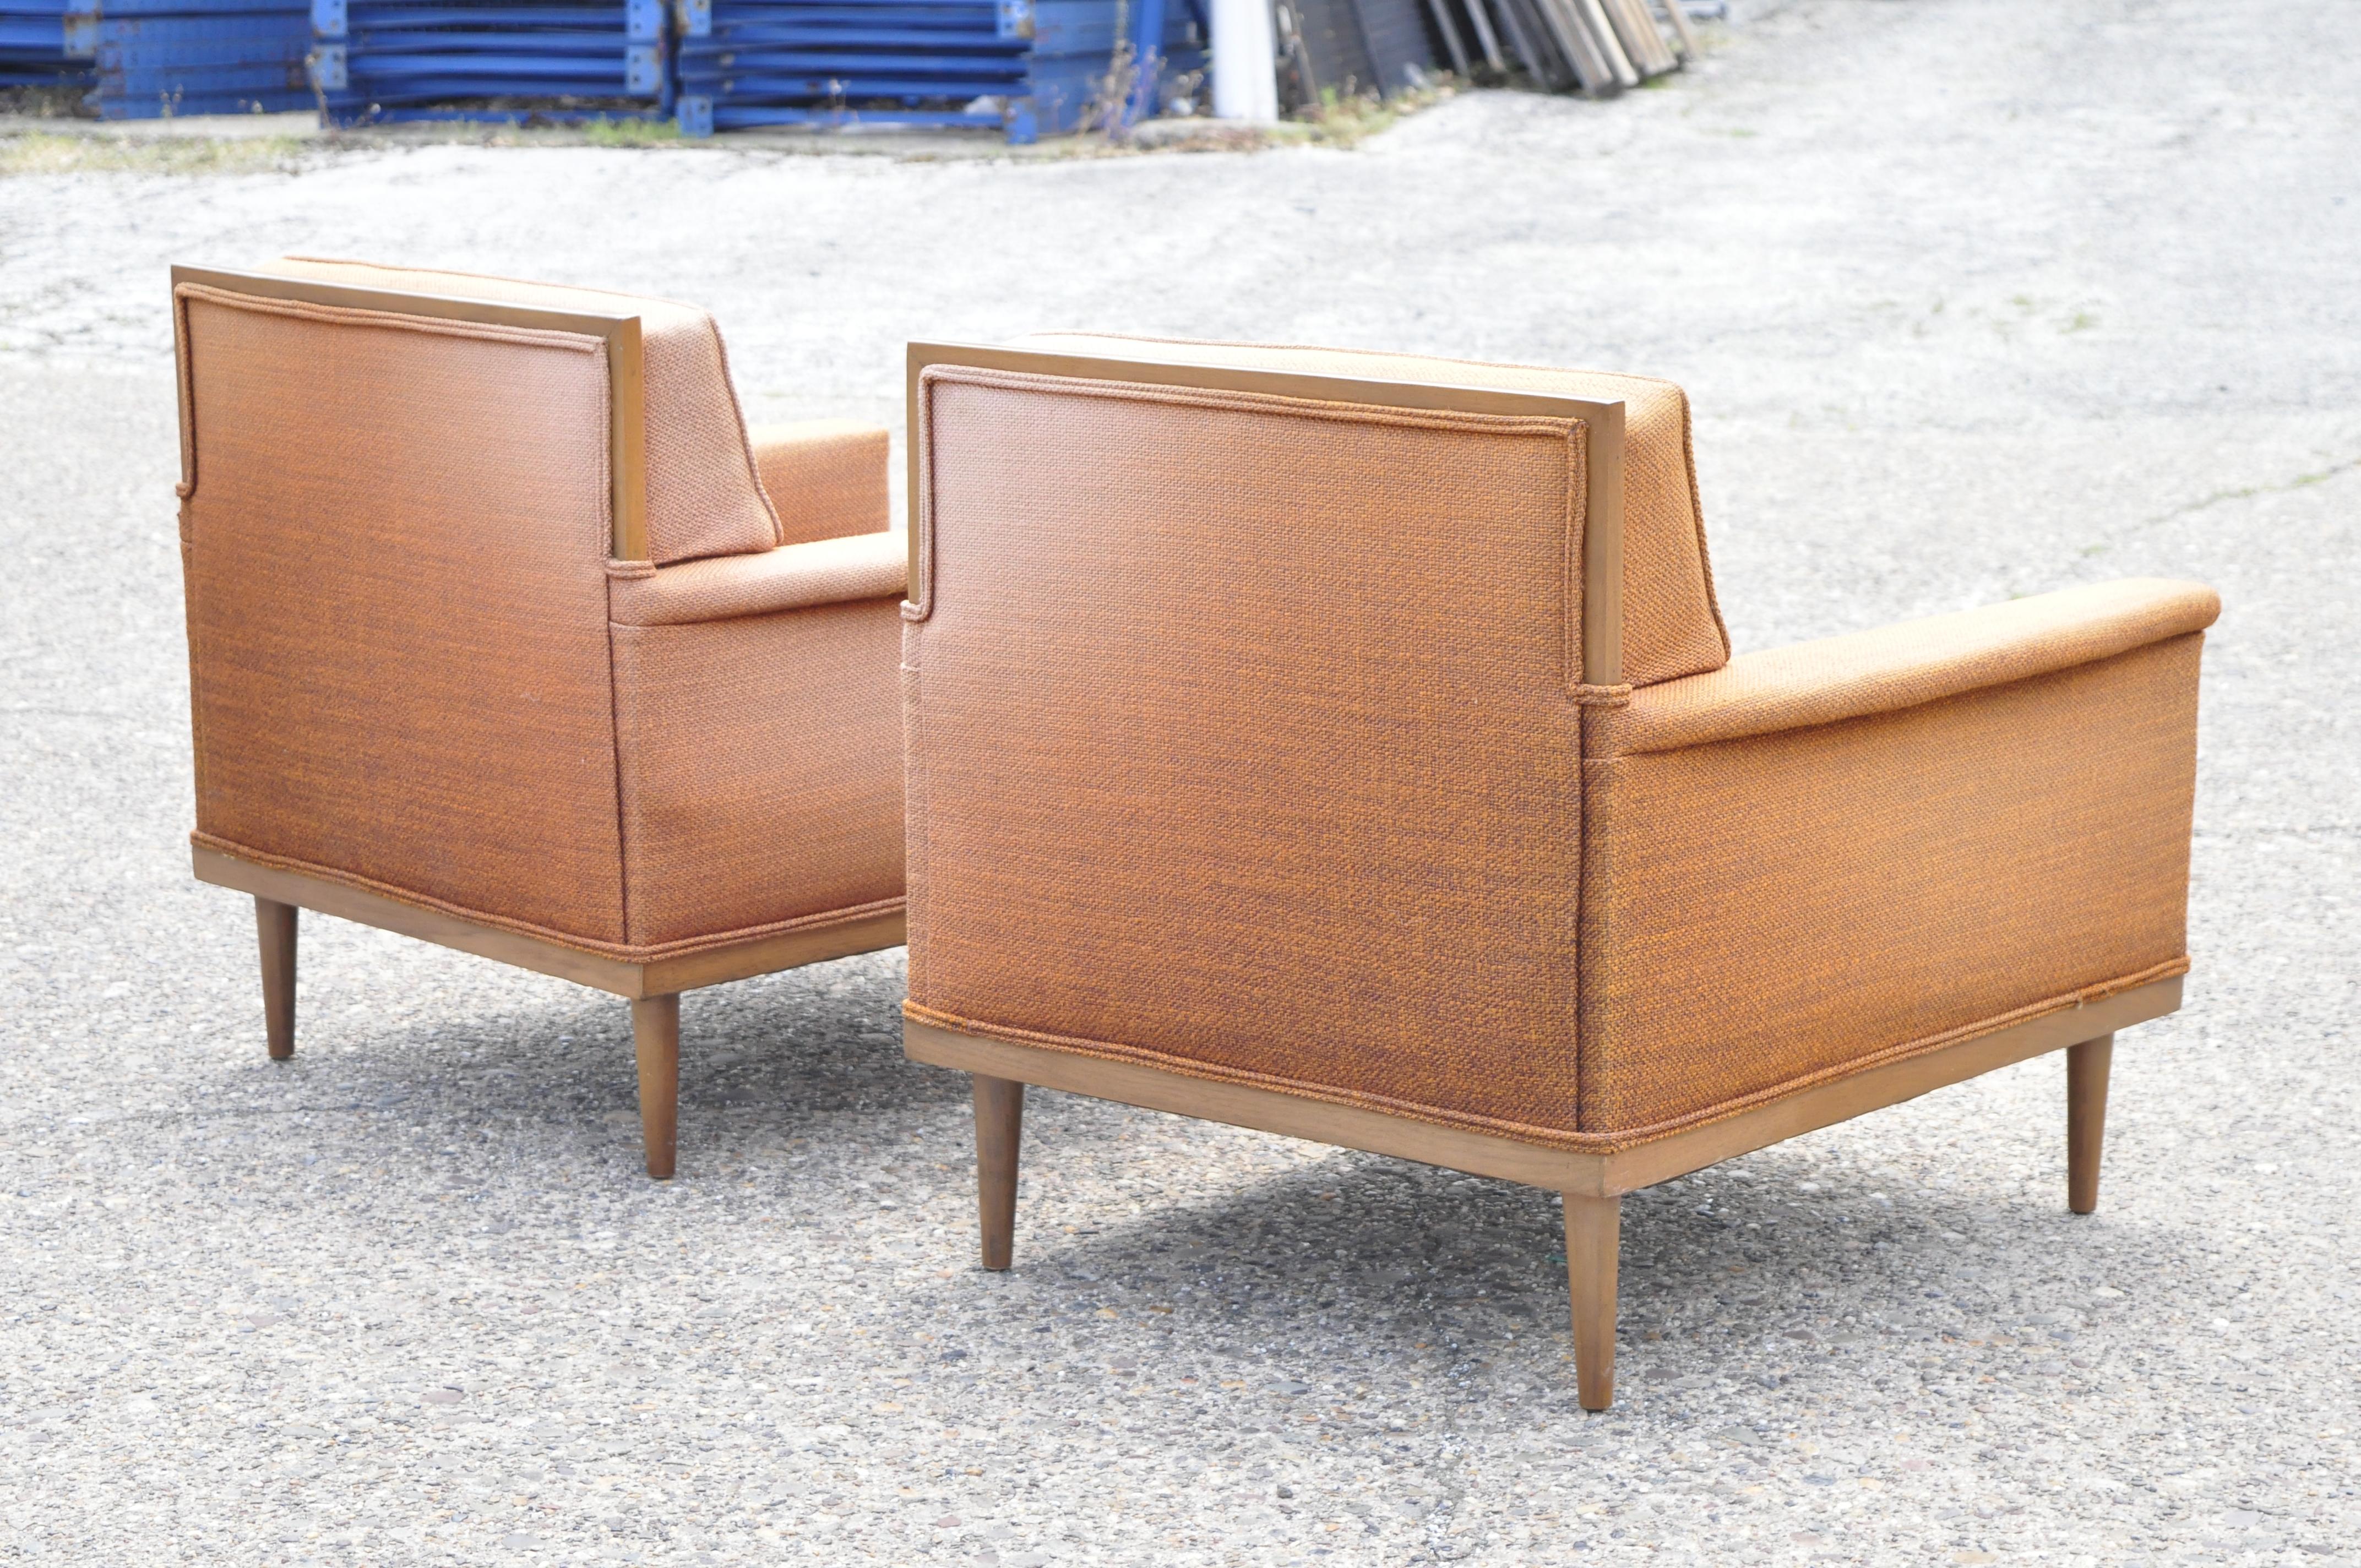 American Pair of Mid-Century Modern Paul McCobb Style Club Lounge Chairs by J.B. Sciver